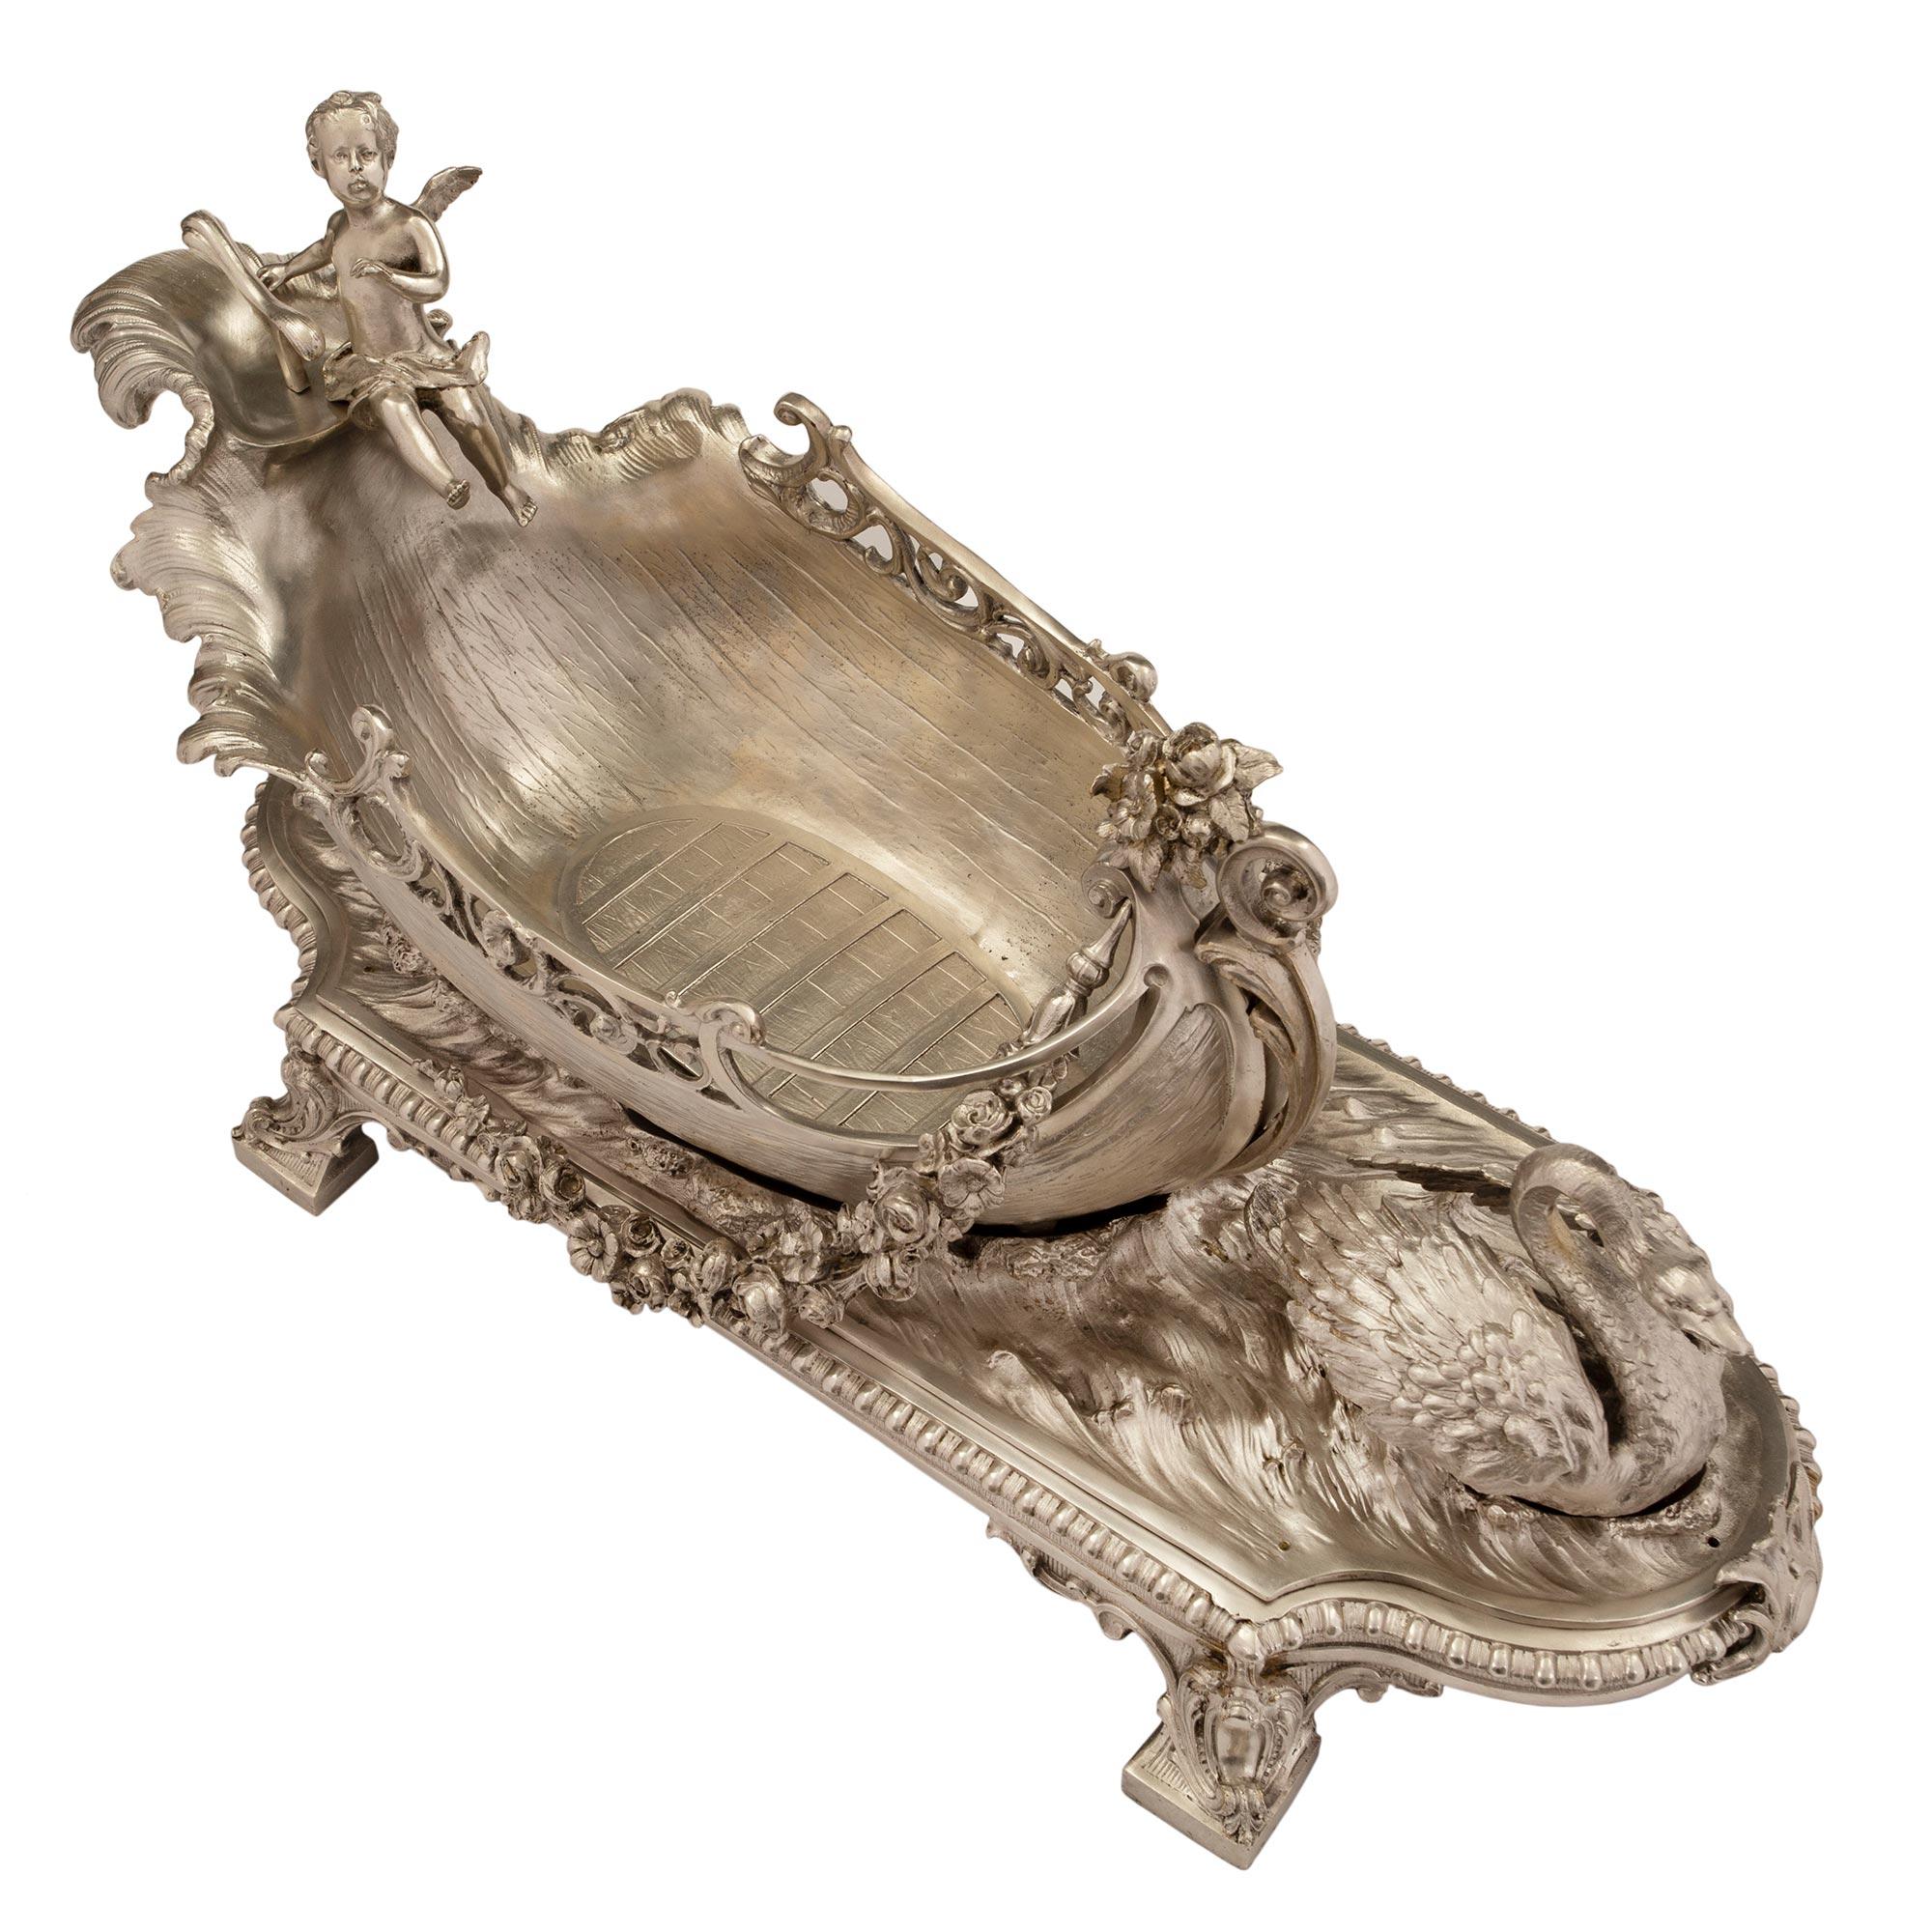 A superb and finely chased French 19th century Louis XV st. silvered bronze centerpiece. The centerpiece is raised on scrolled square feet adorned with acanthus leaves. Above is the plateau with beaded border and a front central Rocaille acanthus